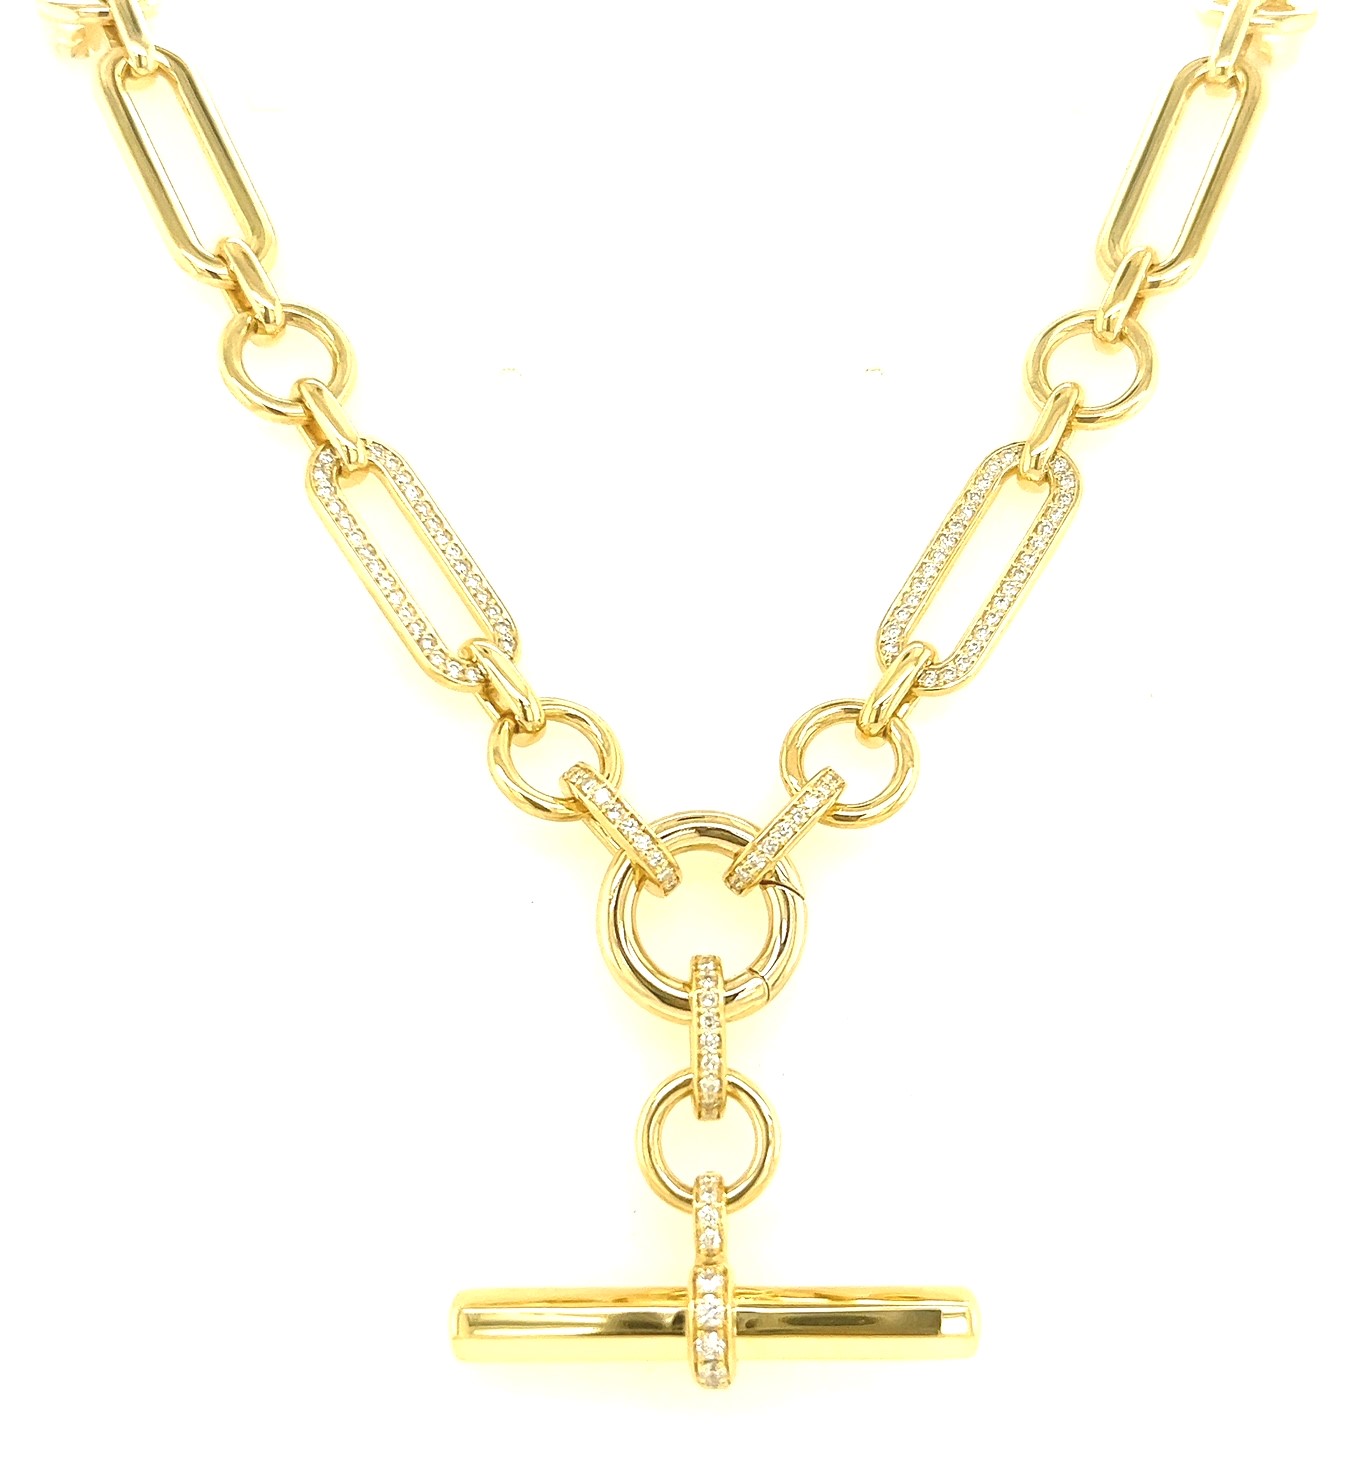 Korman Signature 18kt Yellow Gold Elongated Link Toggle Chain Necklace